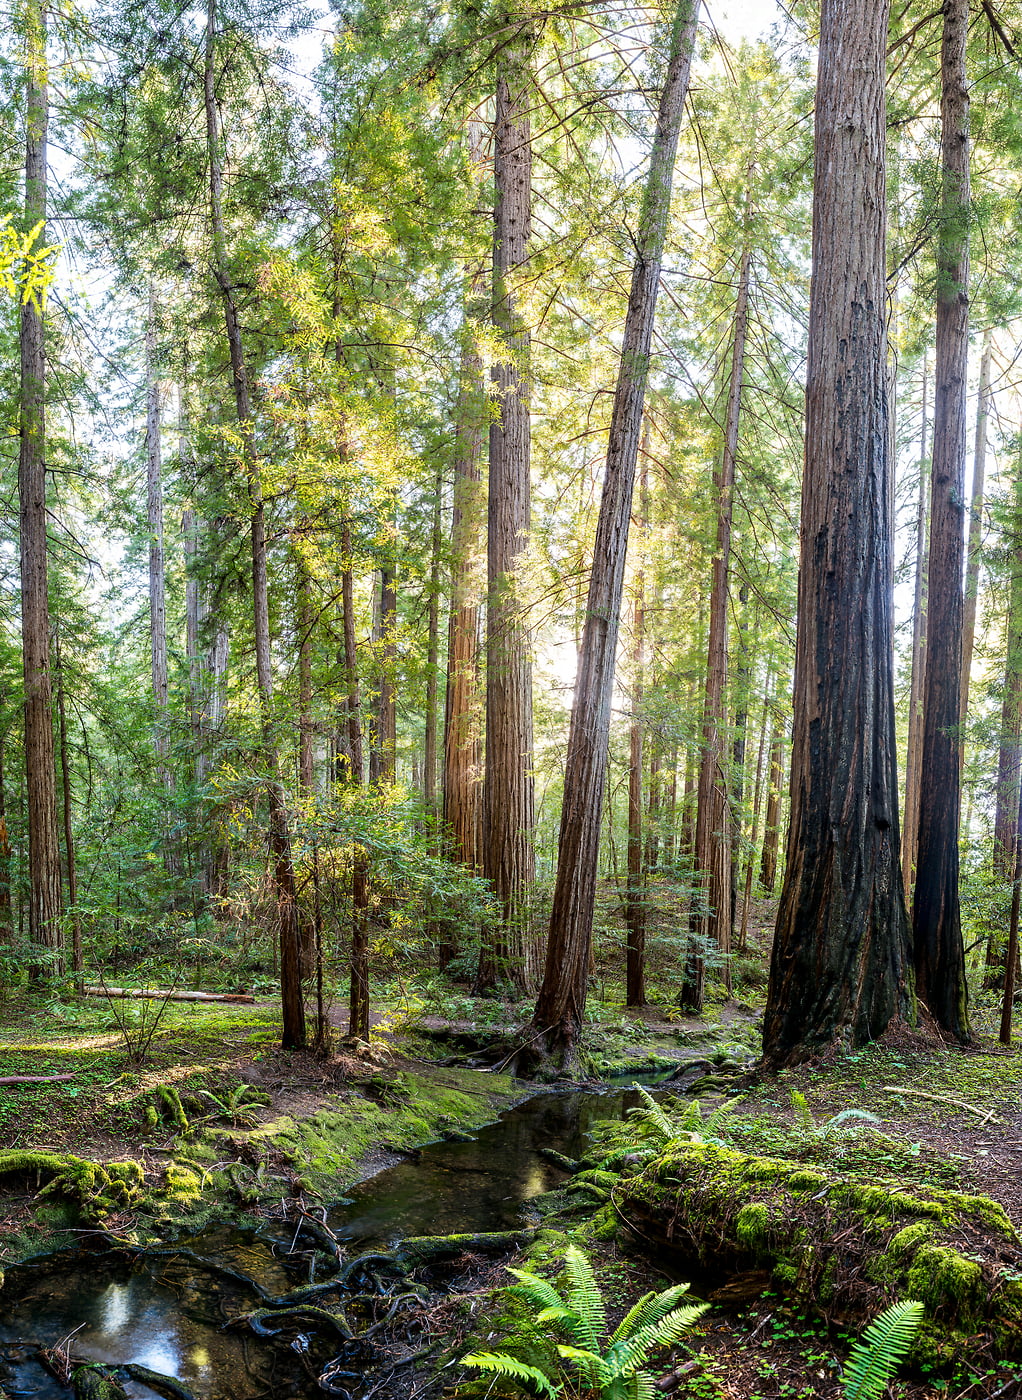 604 megapixels! A very high resolution, large-format VAST photo of a redwood forest with a creek; fine art nature photo created by Justin Katz in Montgomery Woods State Reserve, California.